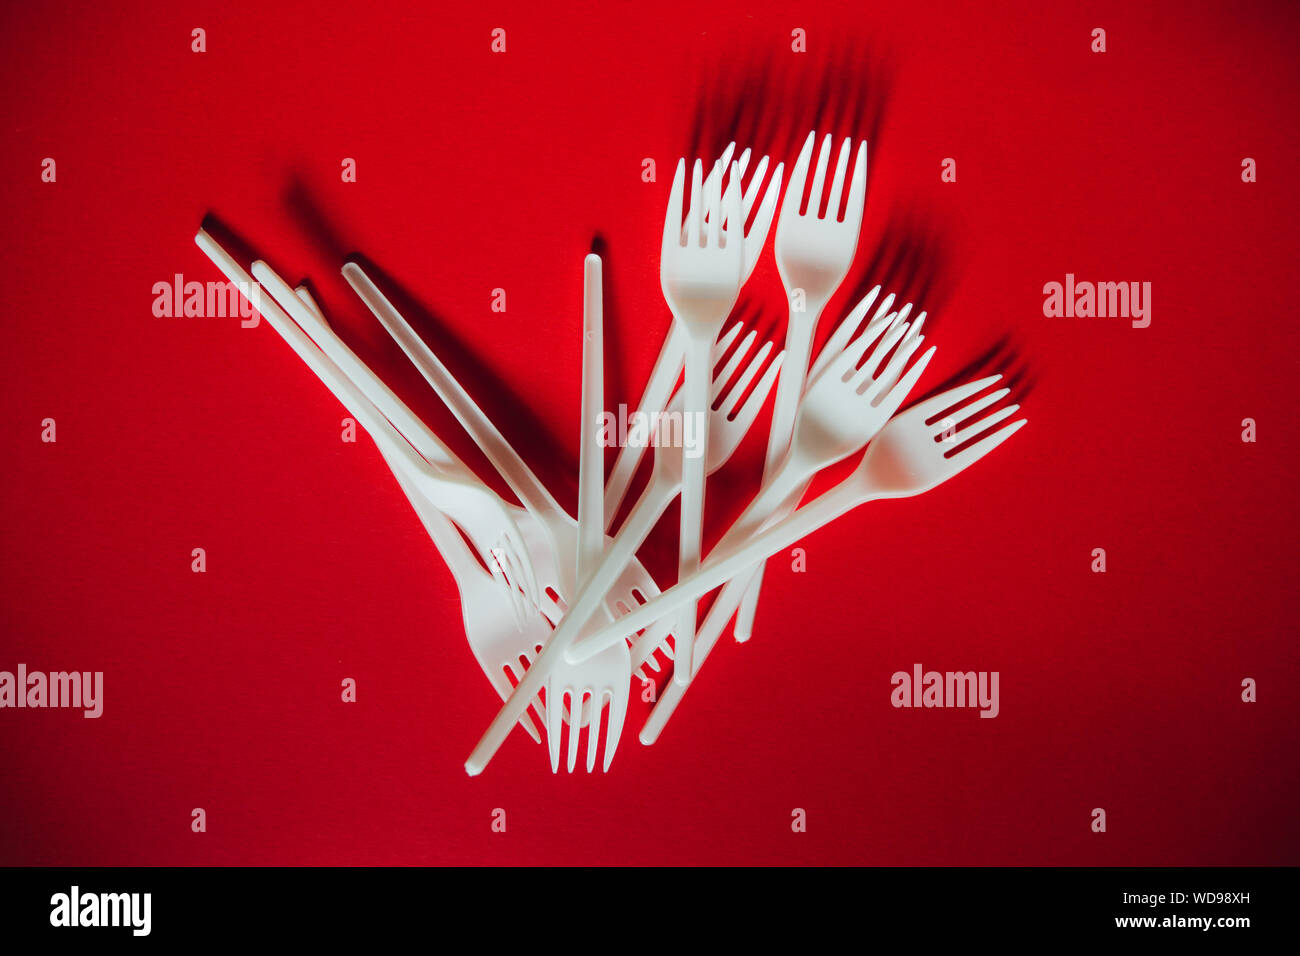 A lot of plastic forks on a red background. The concept of environmental problems, environmental pollution by plastic waste. Top view, close up. Stock Photo